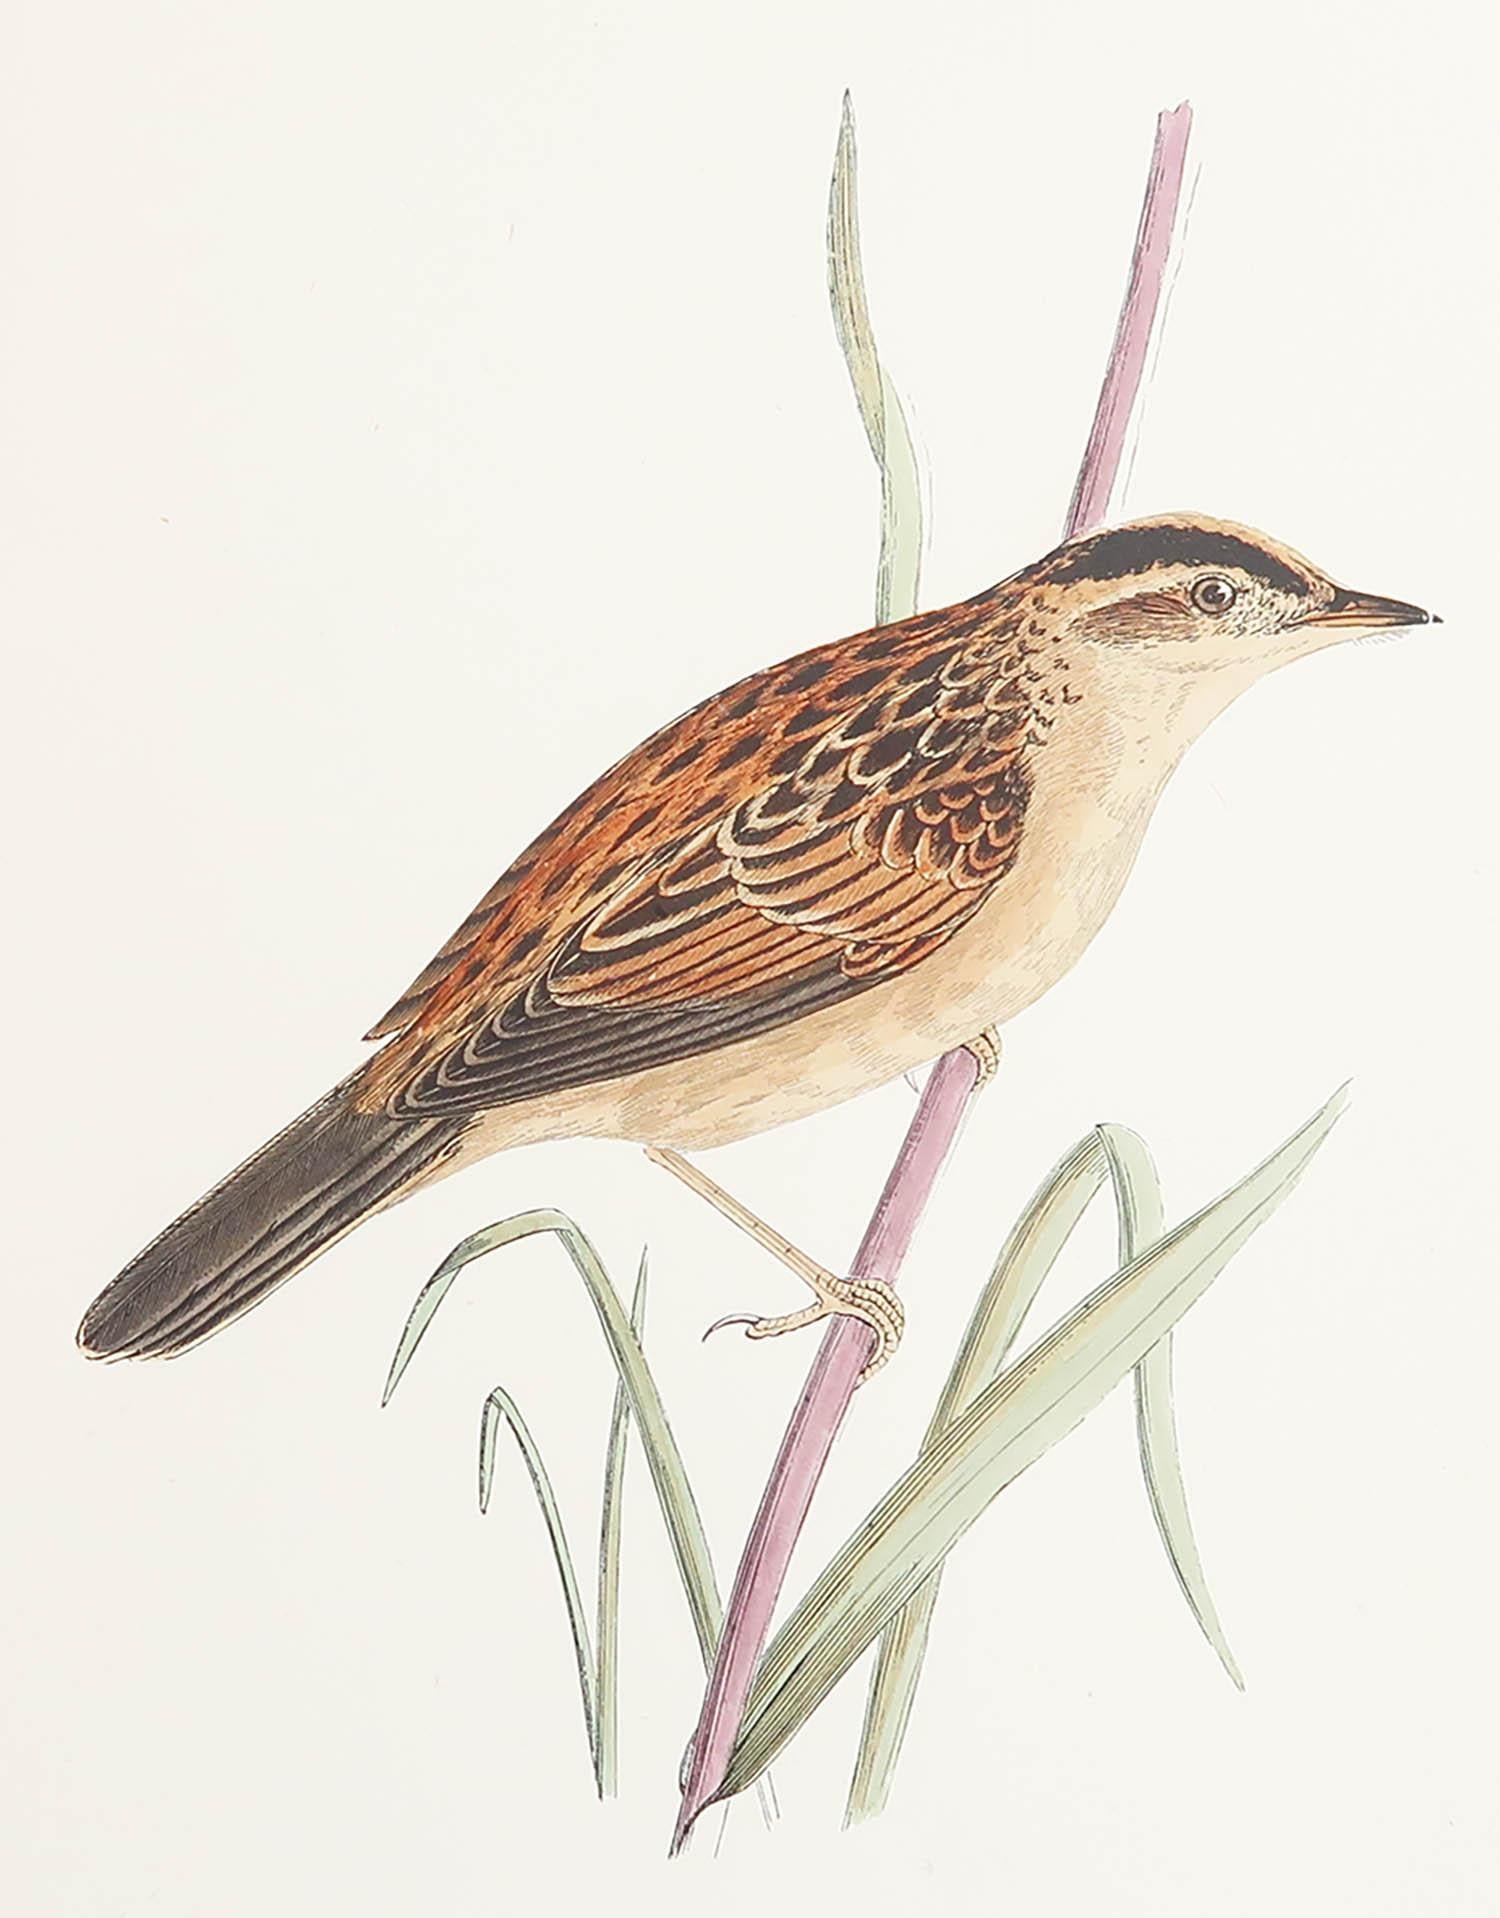 Great image of an Aquatic Warbler

Unframed. It gives you the option of perhaps making a set up using your own choice of frames.

Lithograph after Alexander Francis Lydon.

Original color

Published, circa 1880

Free shipping.




